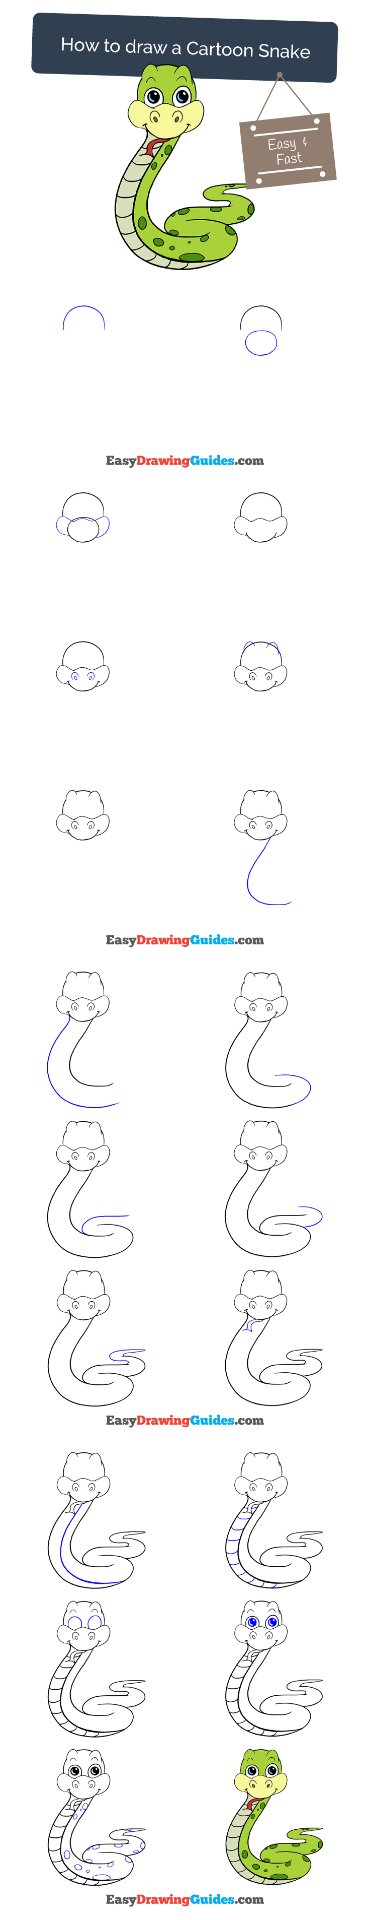 Easy Drawing Guides on Twitter: 